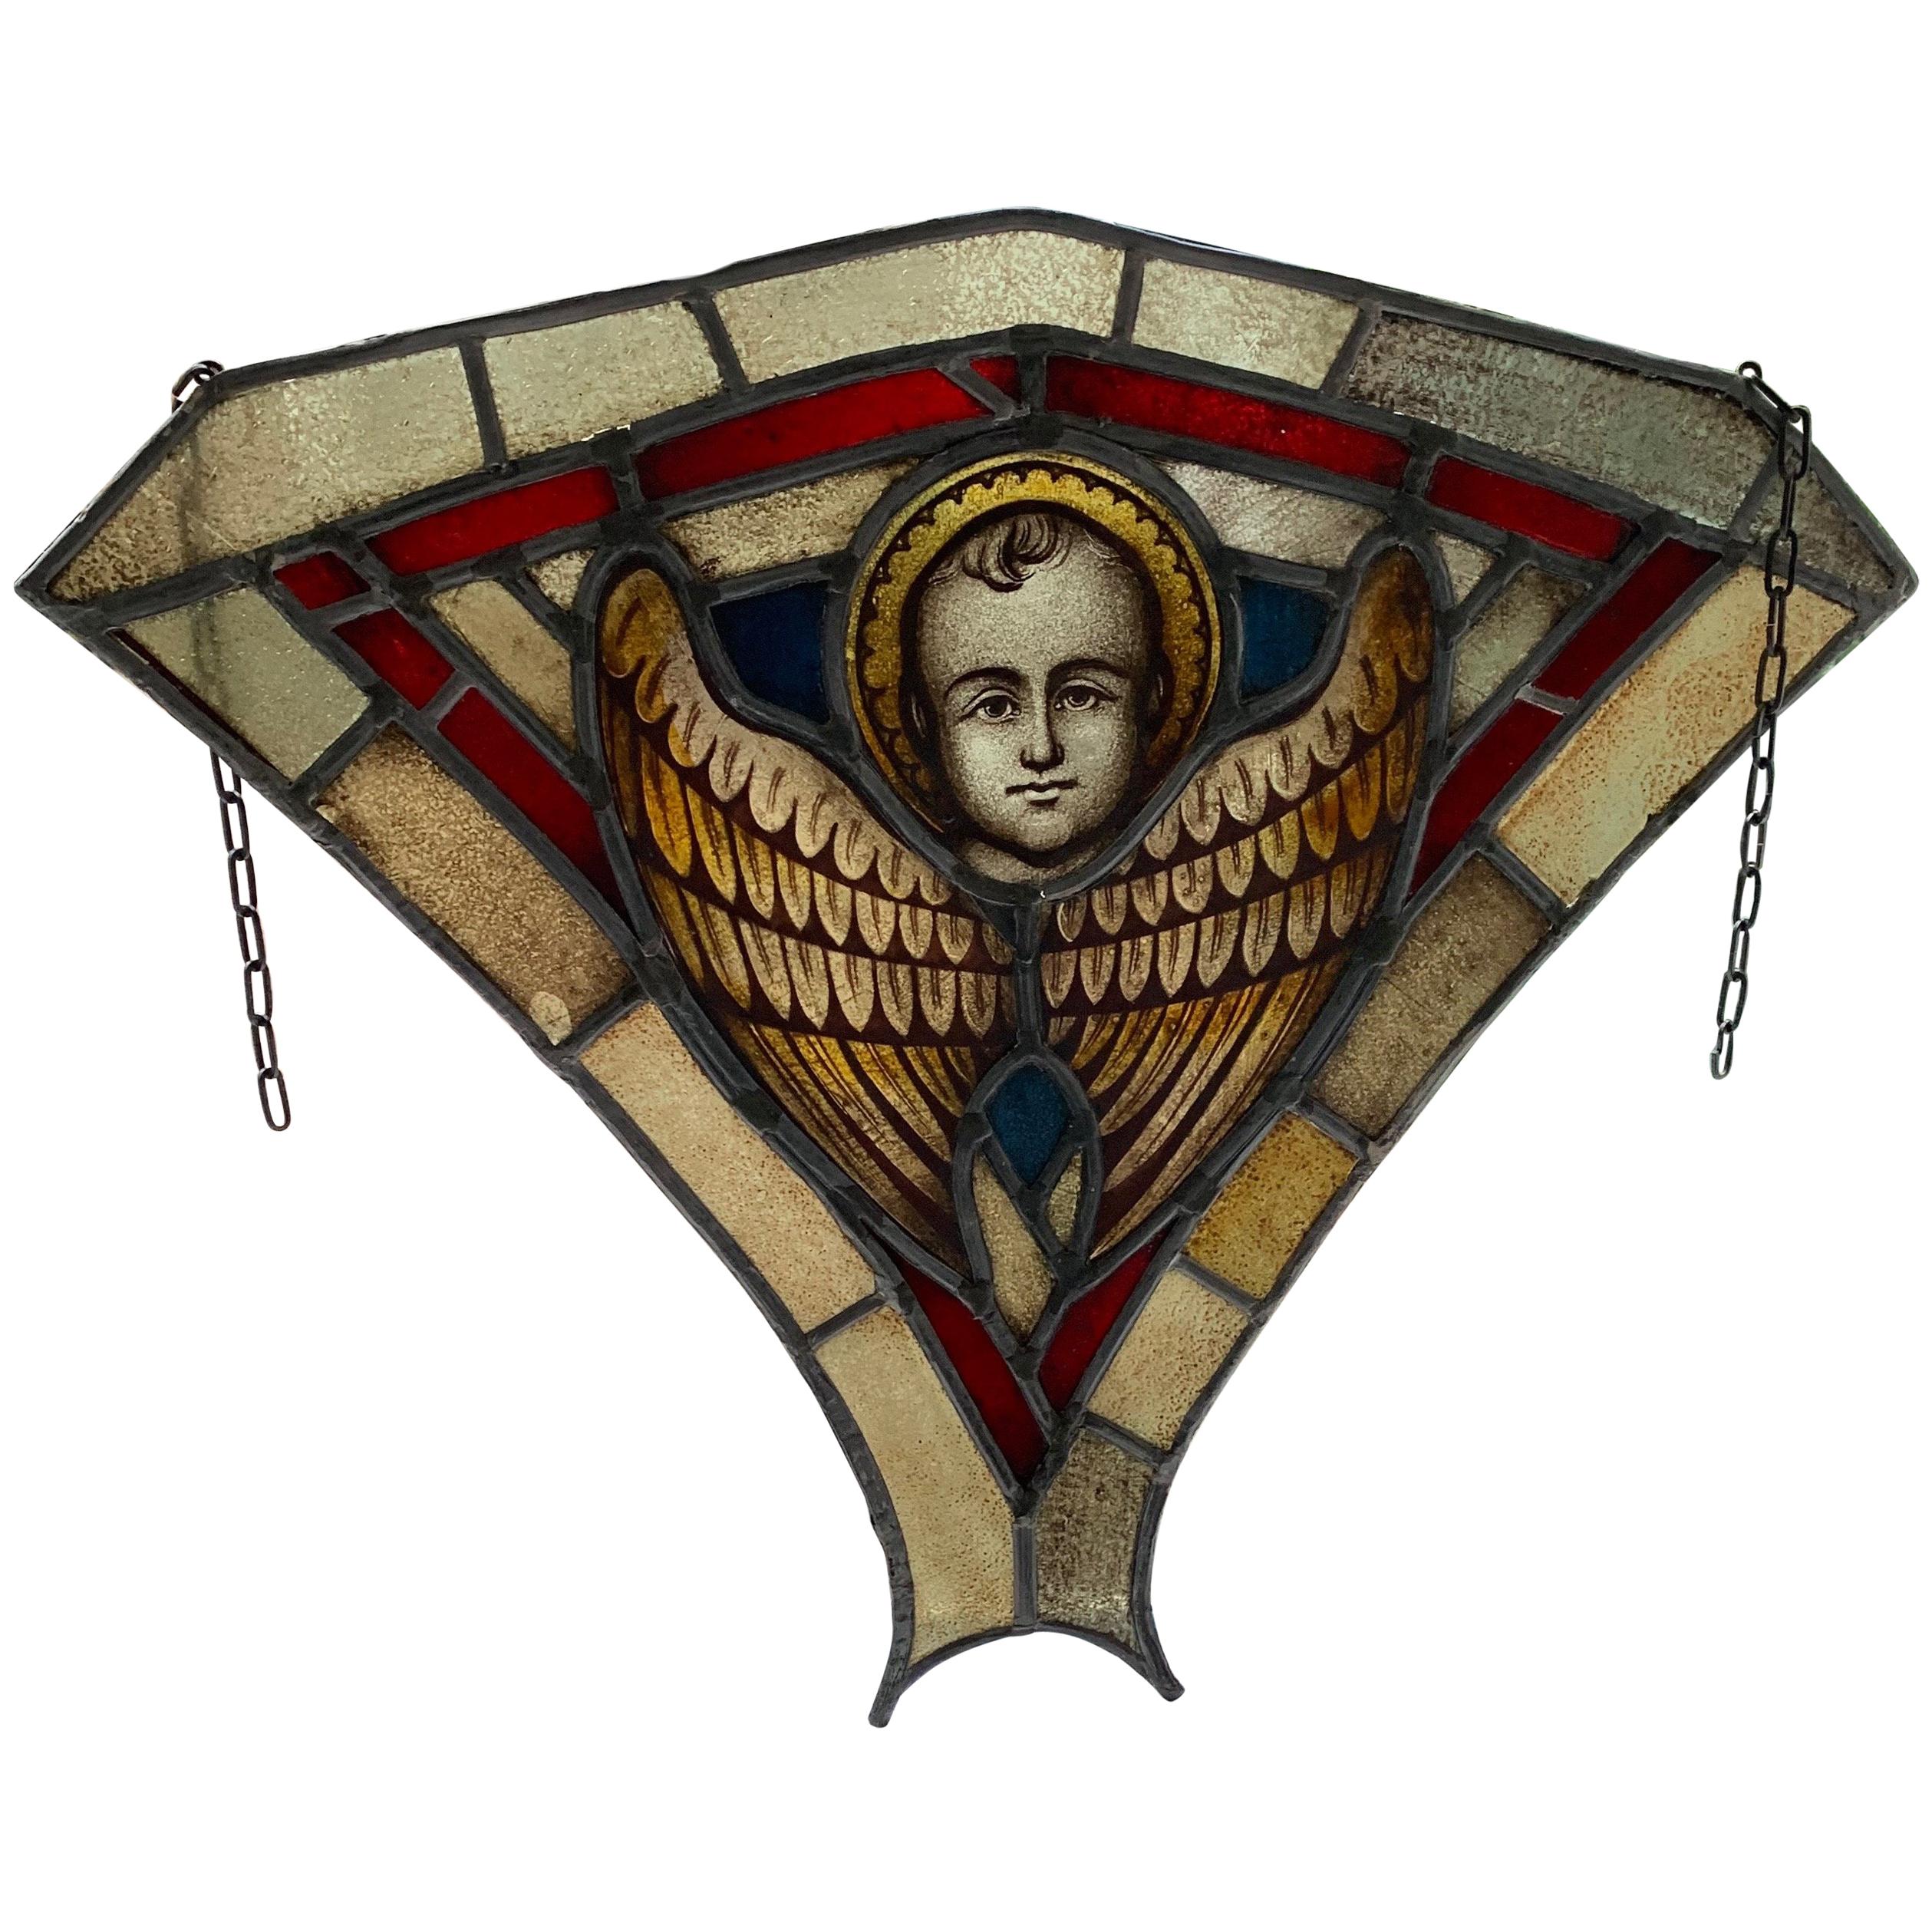 Antique Gothic Revival Stained and Glass Window Hanger Panel with Young Christ